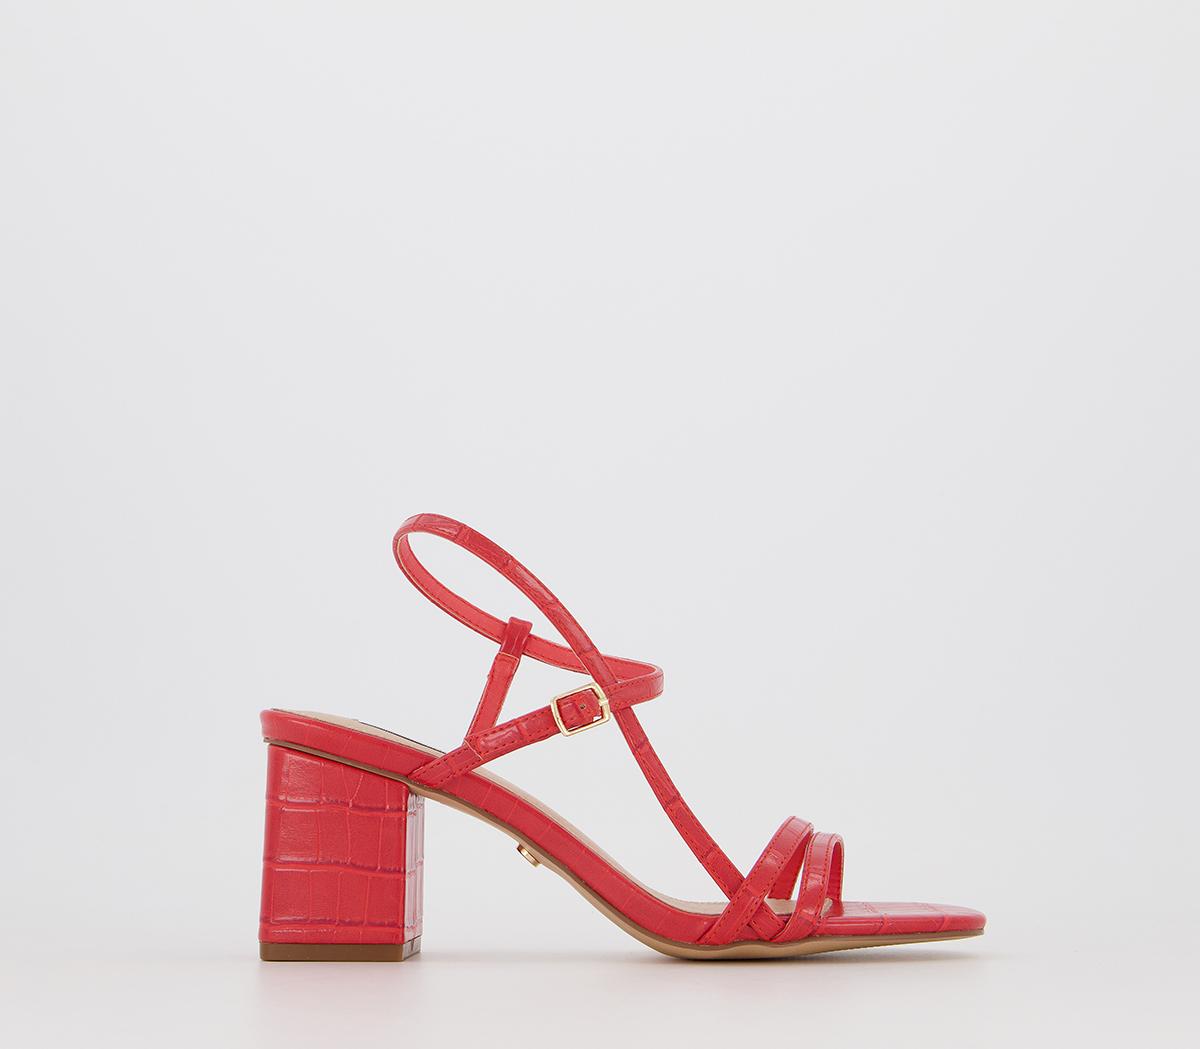 OFFICEMerry Strappy Block SandalsCoral Croc